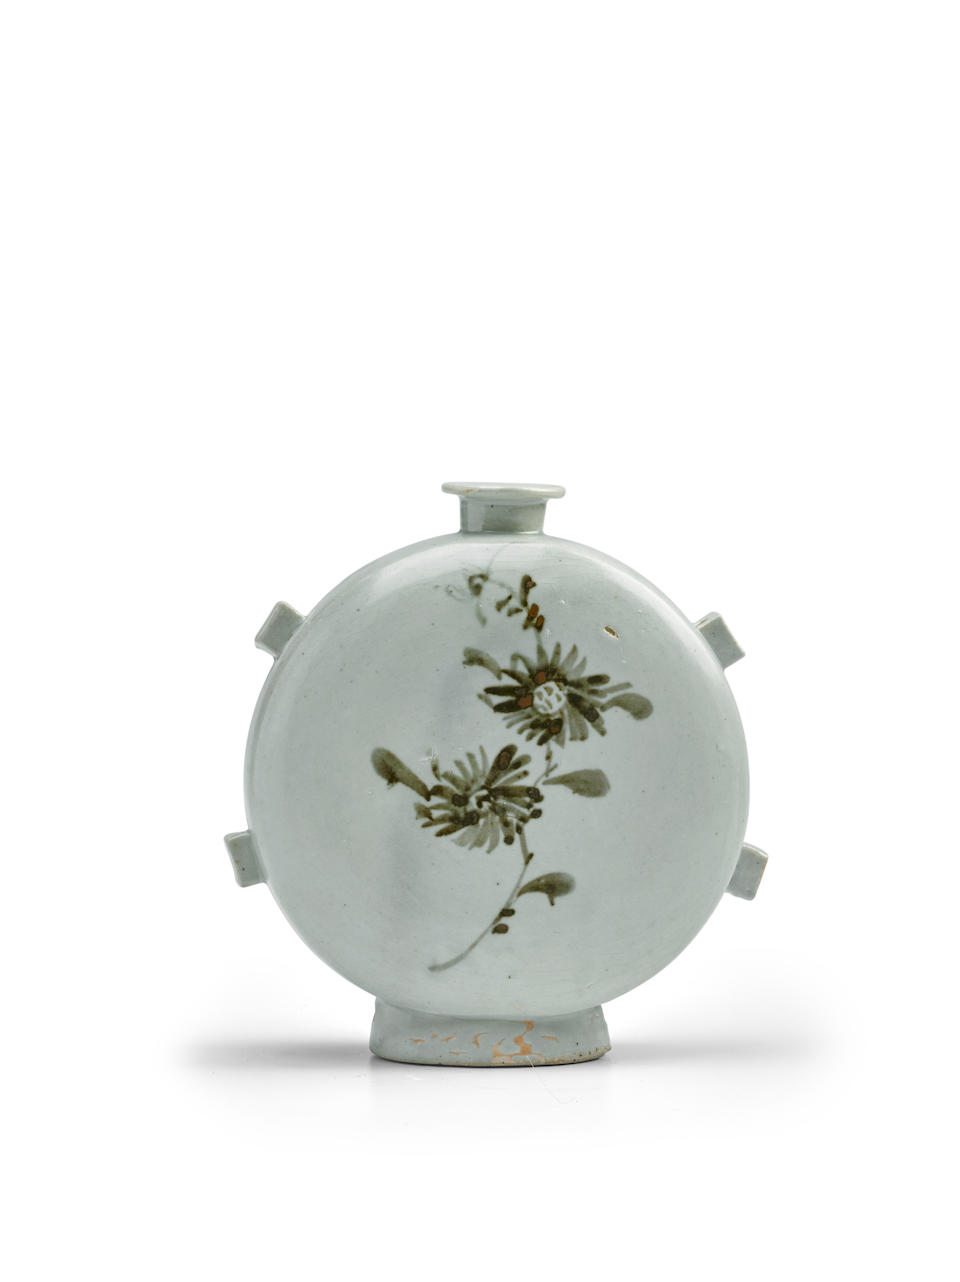 A fine iron-decorated porcelain moon flask Joseon dynasty (1392-1897), 17th/18th century